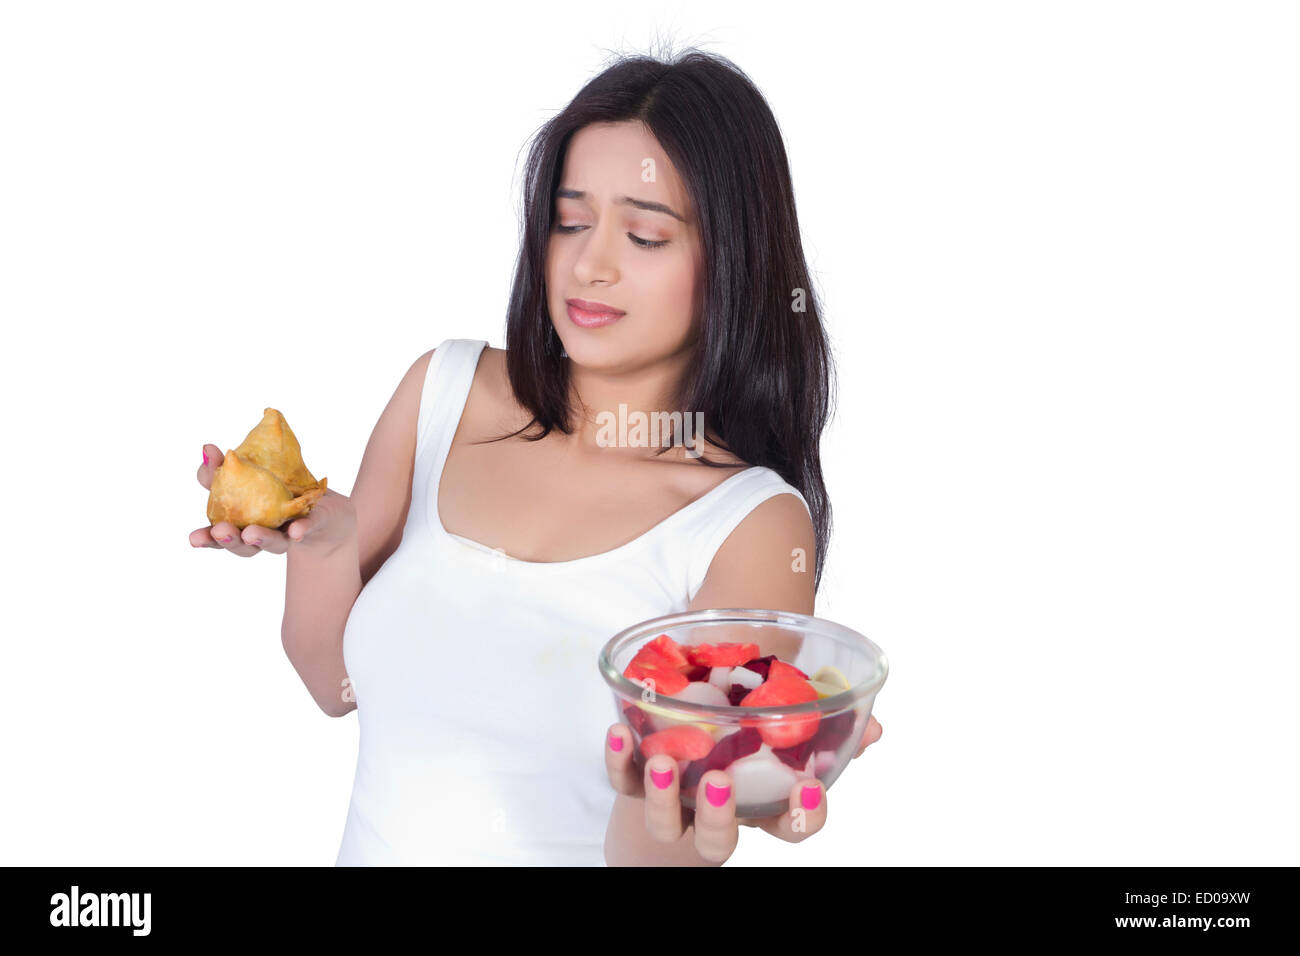 1 indian Beautiful lady  Dieting Stock Photo